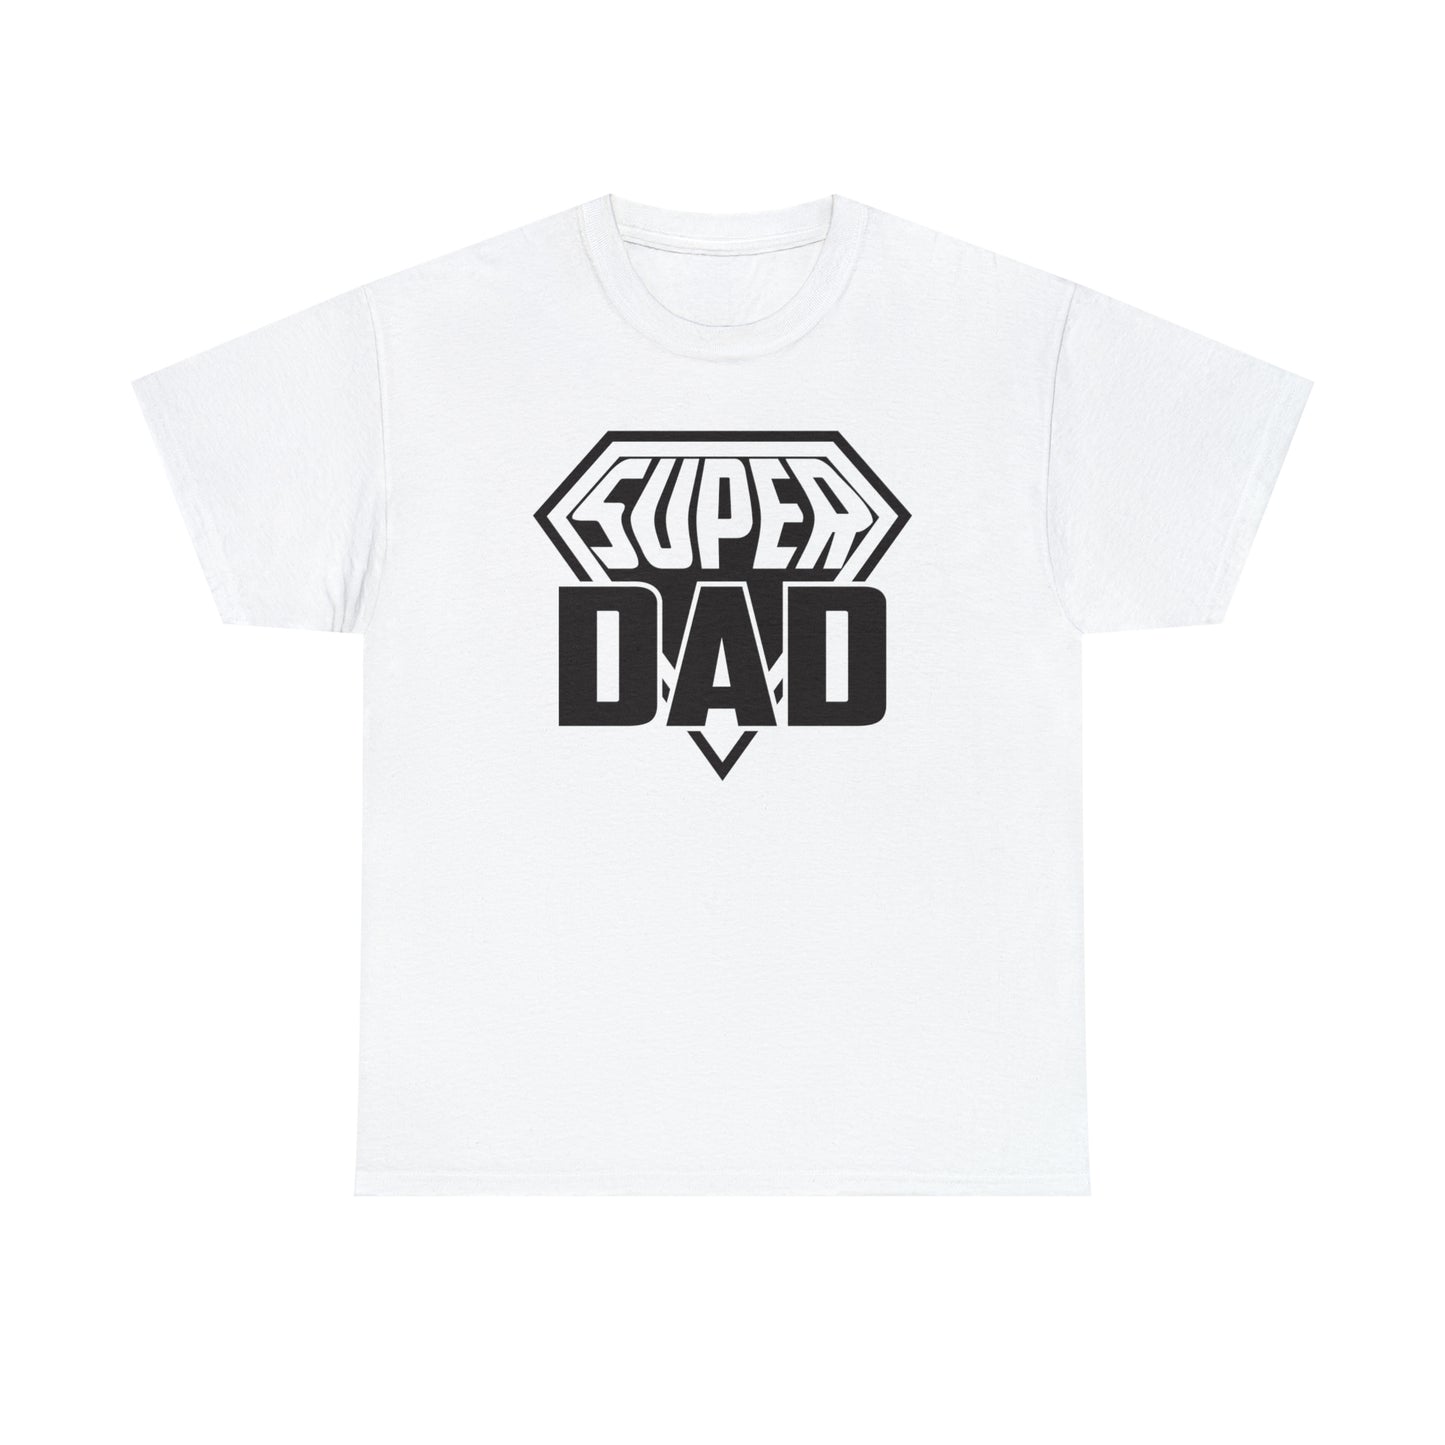 Super Dad T-Shirt For Father's Day TShirt For Dad T Shirt For Father's Day Gift